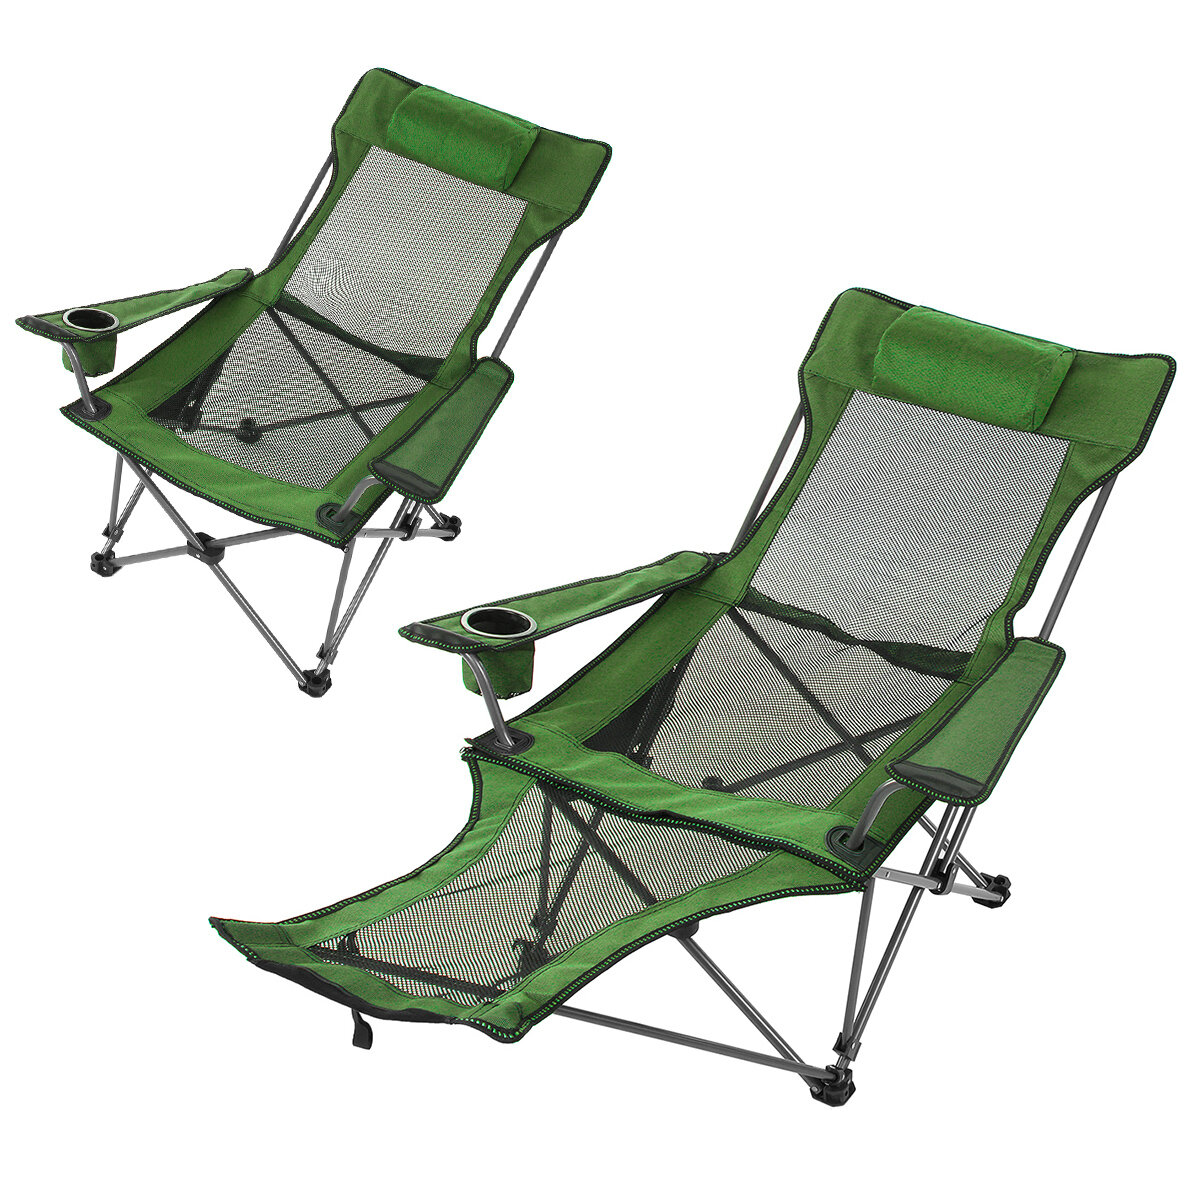 Image of Folding Chair Portable Beach Lunch Nap Chair Picnic Barbecue Office Recliner Chair Outdoor Camping